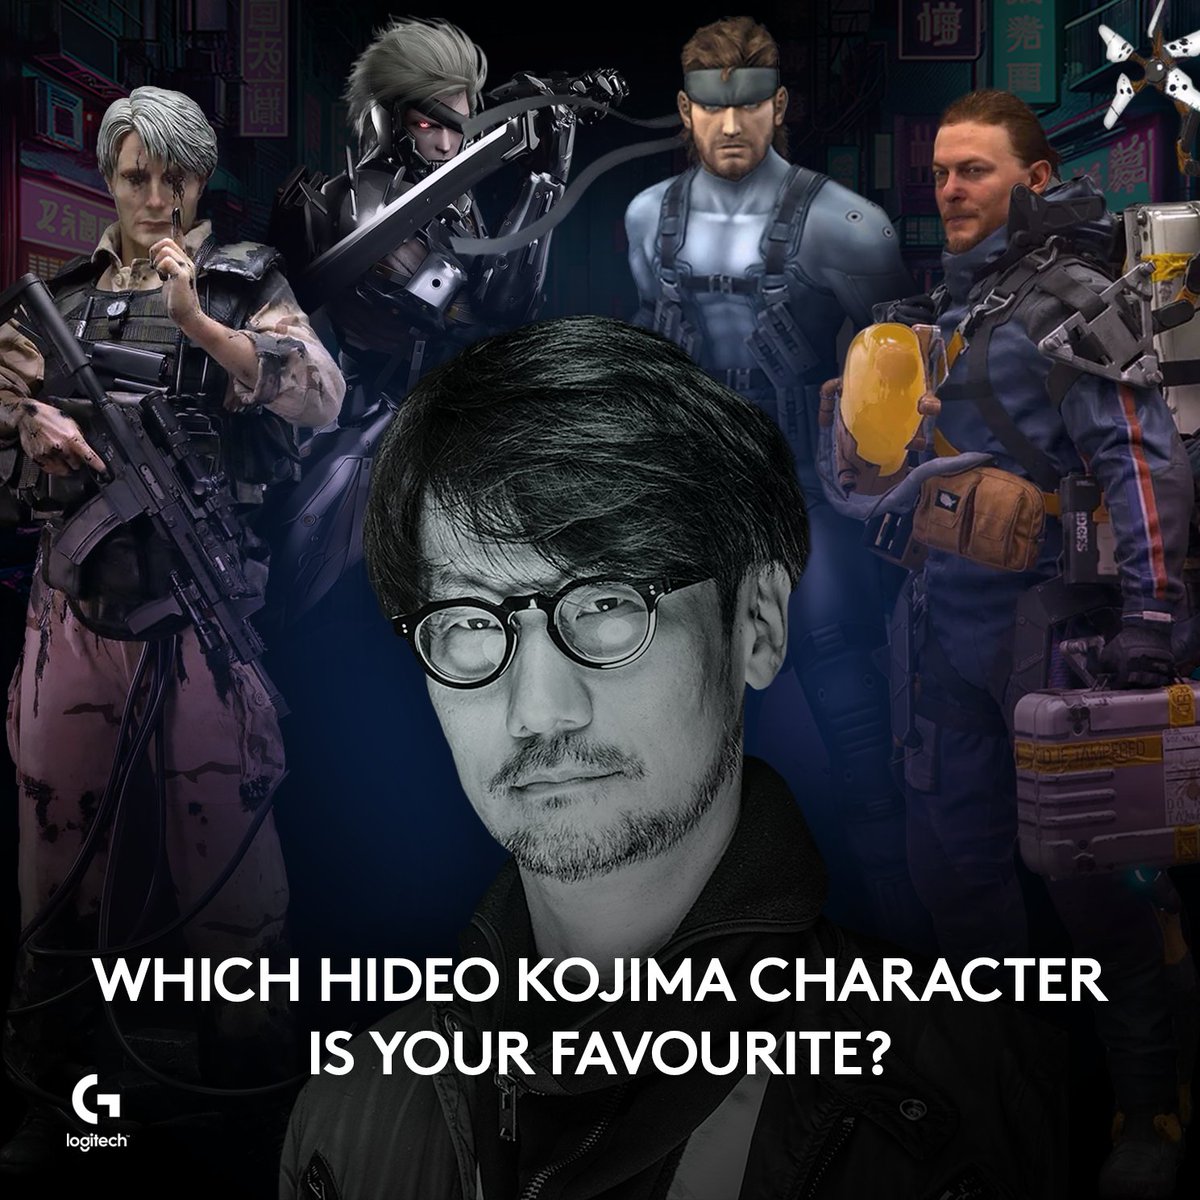 Hideo Kojima is one of the most iconic video game directors of all time. From the Metal Gear Series to Death Stranding and the upcoming OD, Kojima’s work is memorable to say the least. 🤩🔥 Which character of his is your fave? 👇